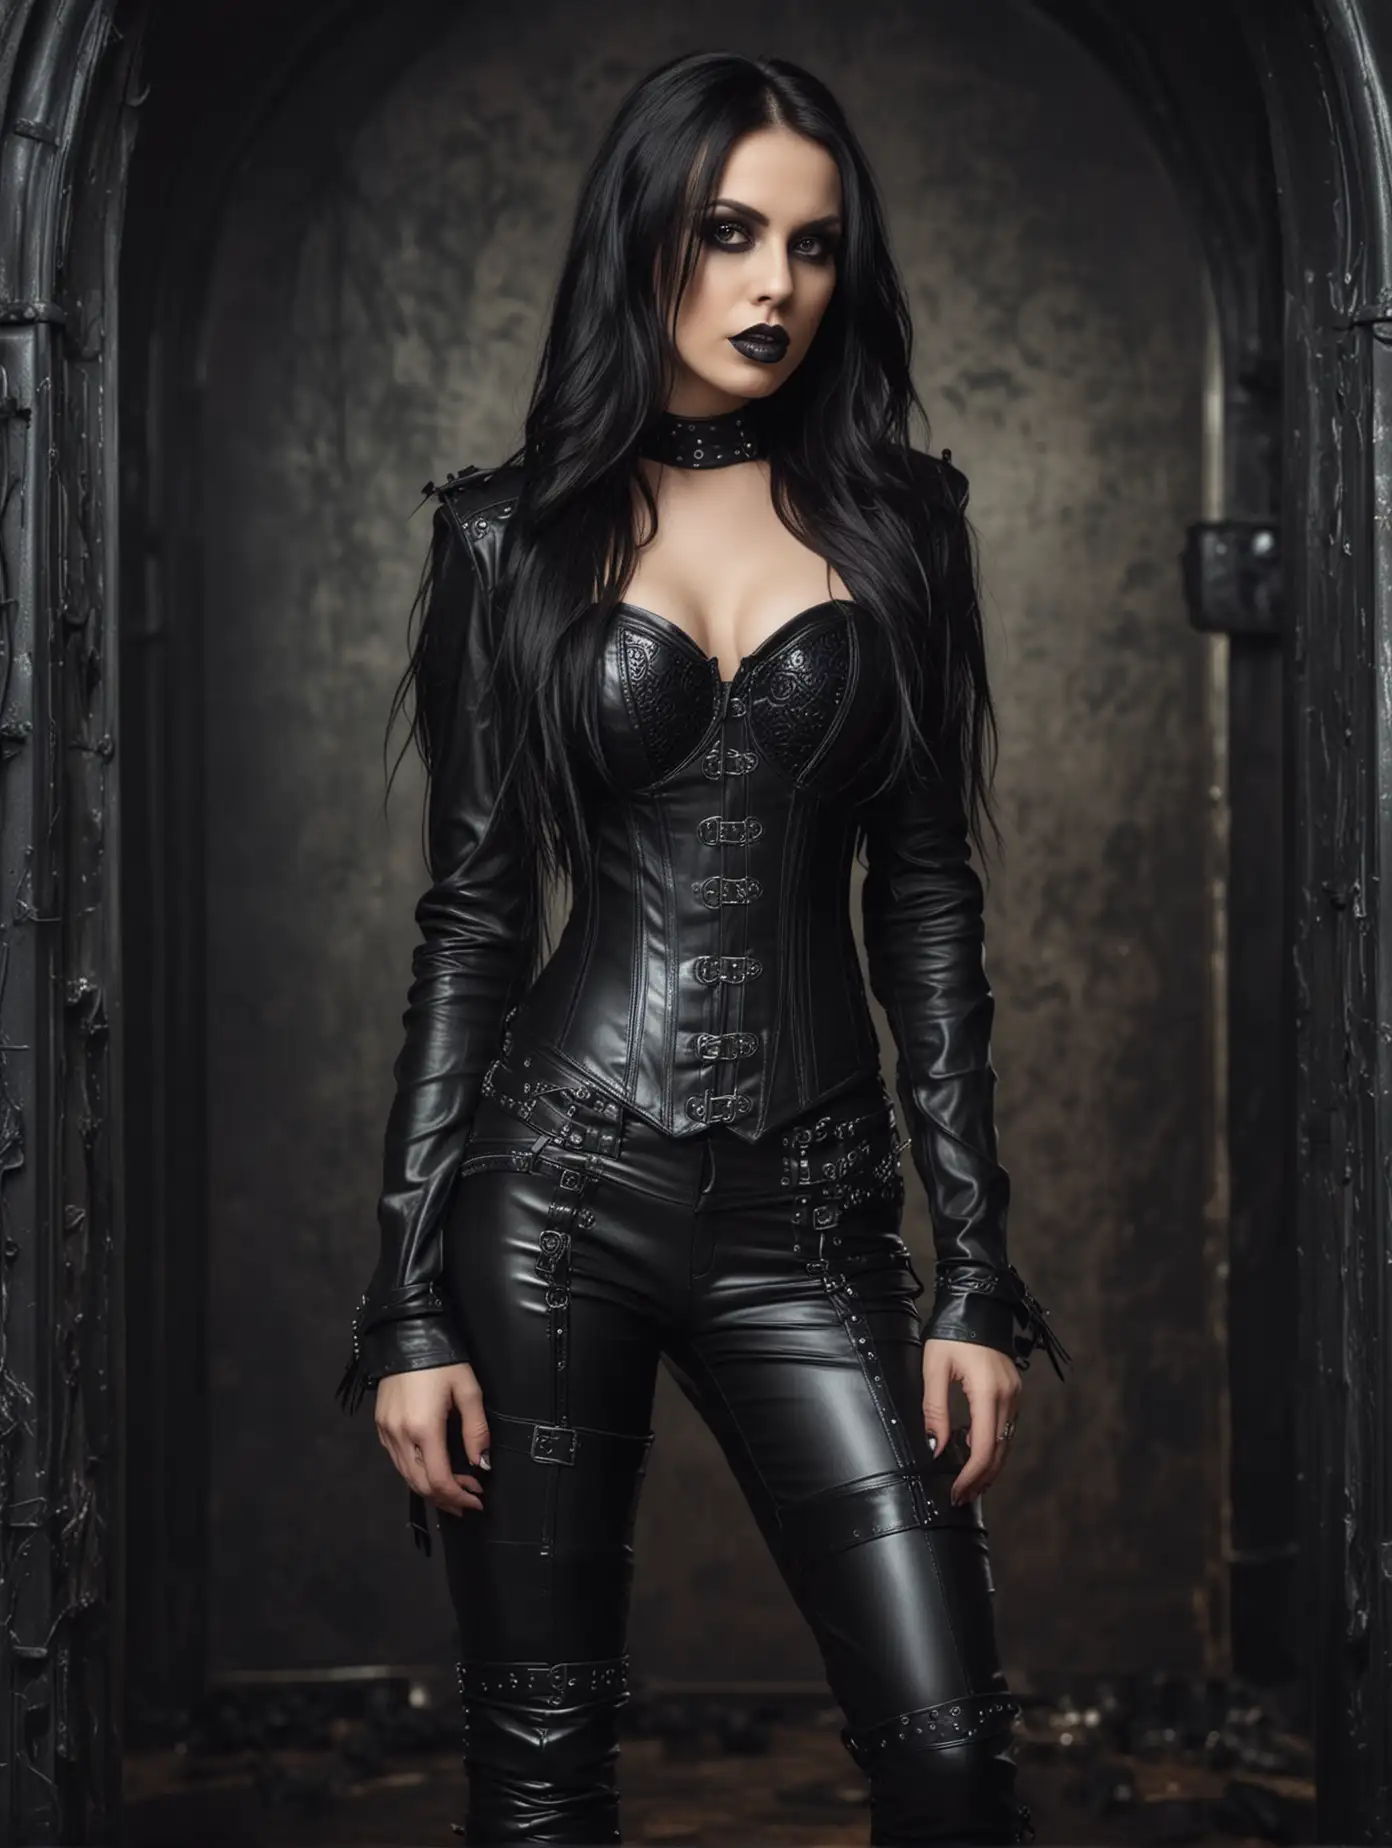 Gothic girl in latex corset and pants, long hair, smokey eye make up, gothic rocker man with leather pants. Easter egg, dark surroundings.